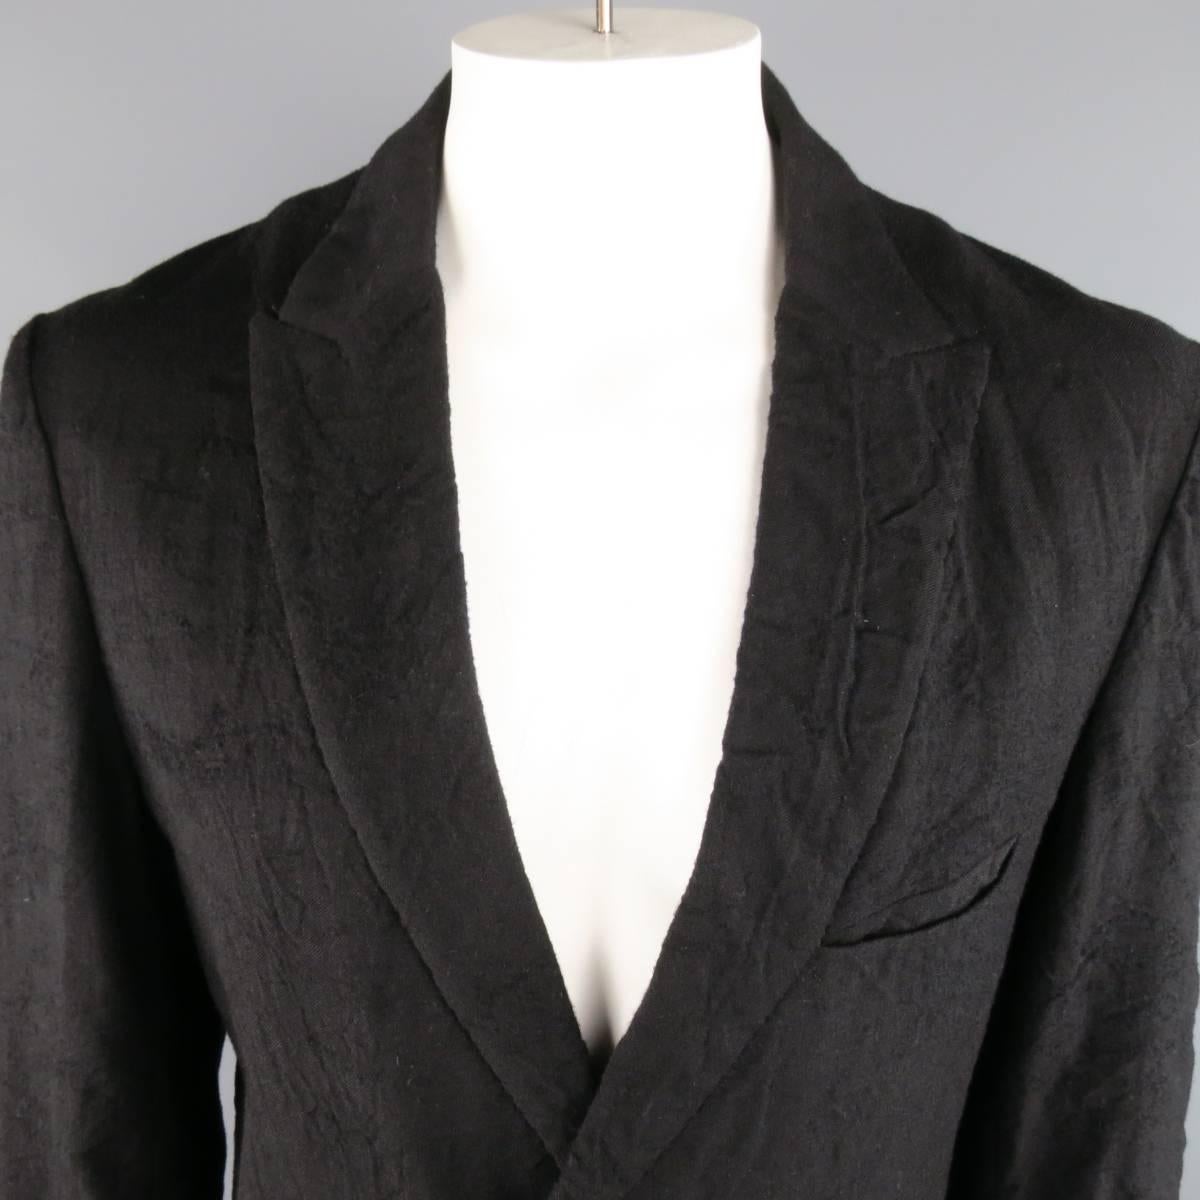 FORME d'expression Jacket consists of wool material in a black color tone. Designed in a peak lapel collar, single button front and bottom inseam pockets. Detailed with
4-button cuffs, single back vent and full construction lining. Made in